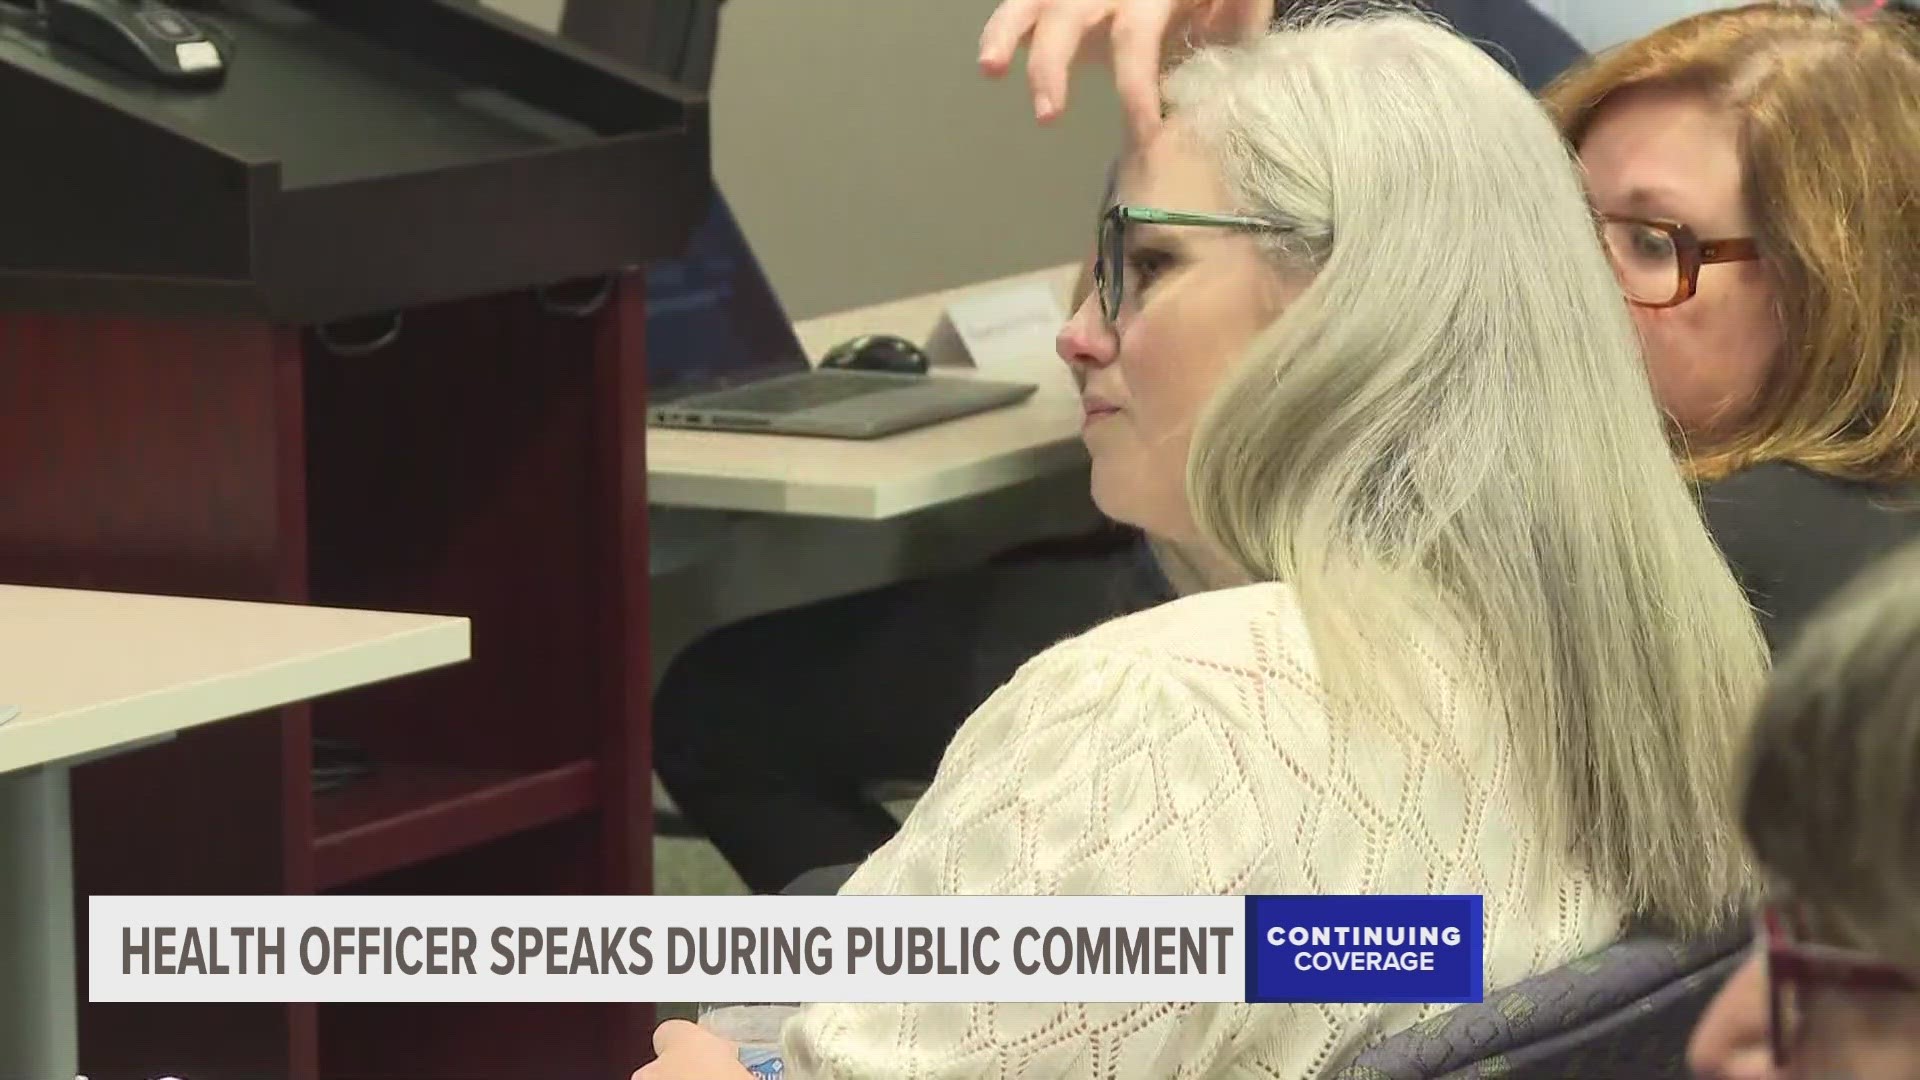 Adeline Hambley said she felt the only way to have her voice heard was to speak during public comment.